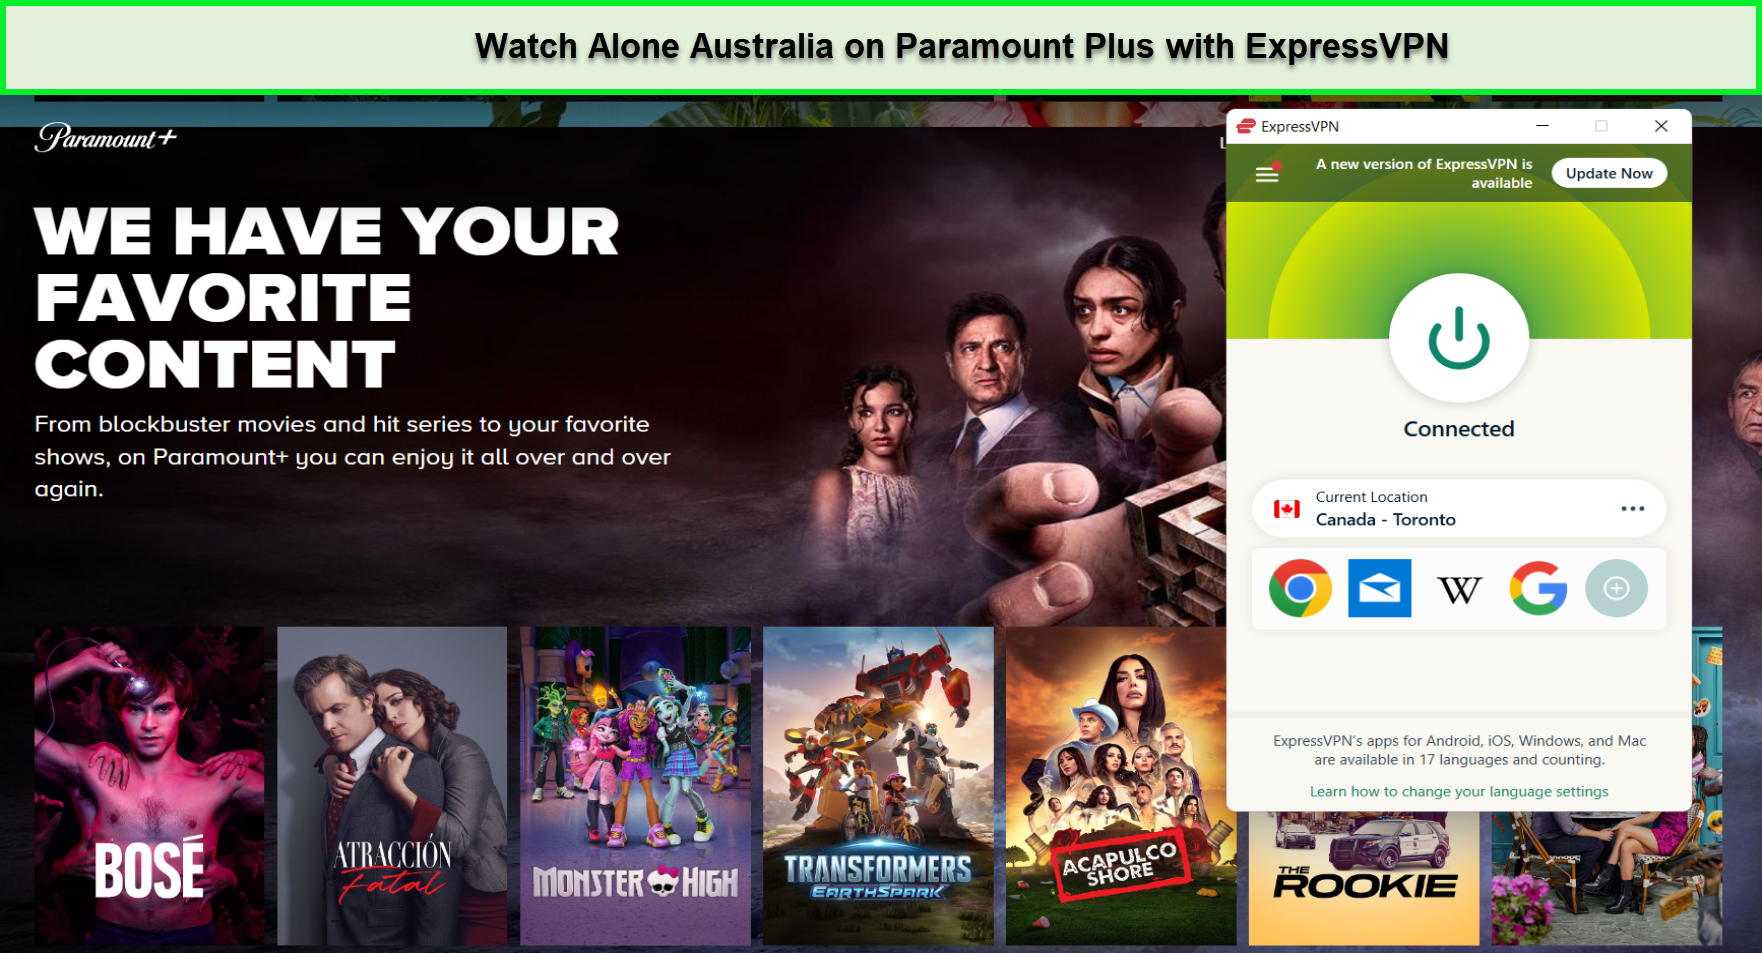 Unblock-Paramount-in-New Zealand-with-ExpressVPN-to-watch-Alone-Australia 